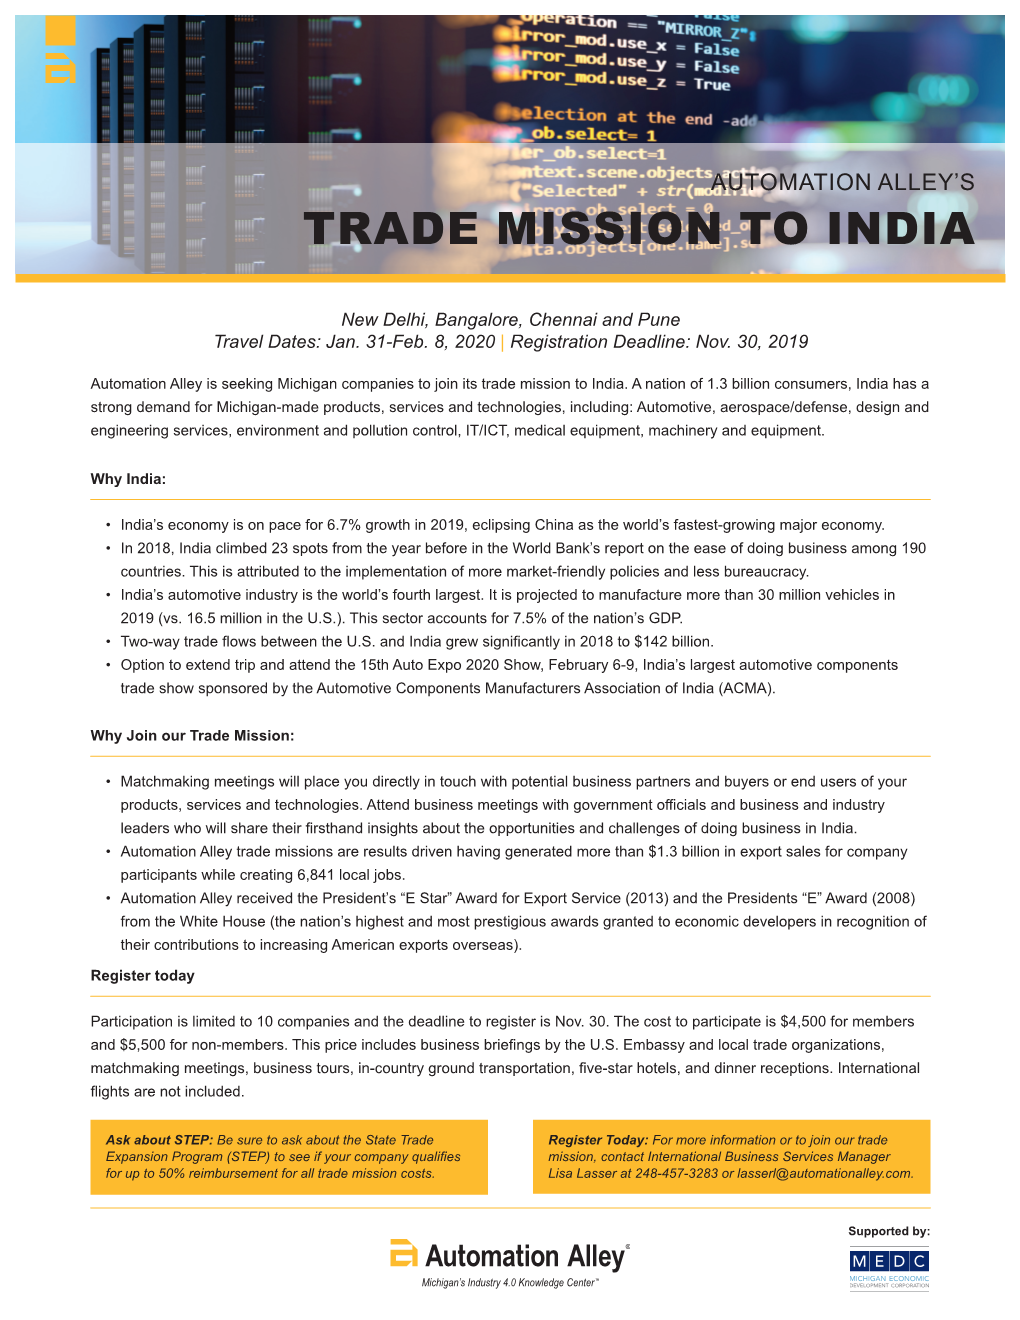 Trade Mission to India